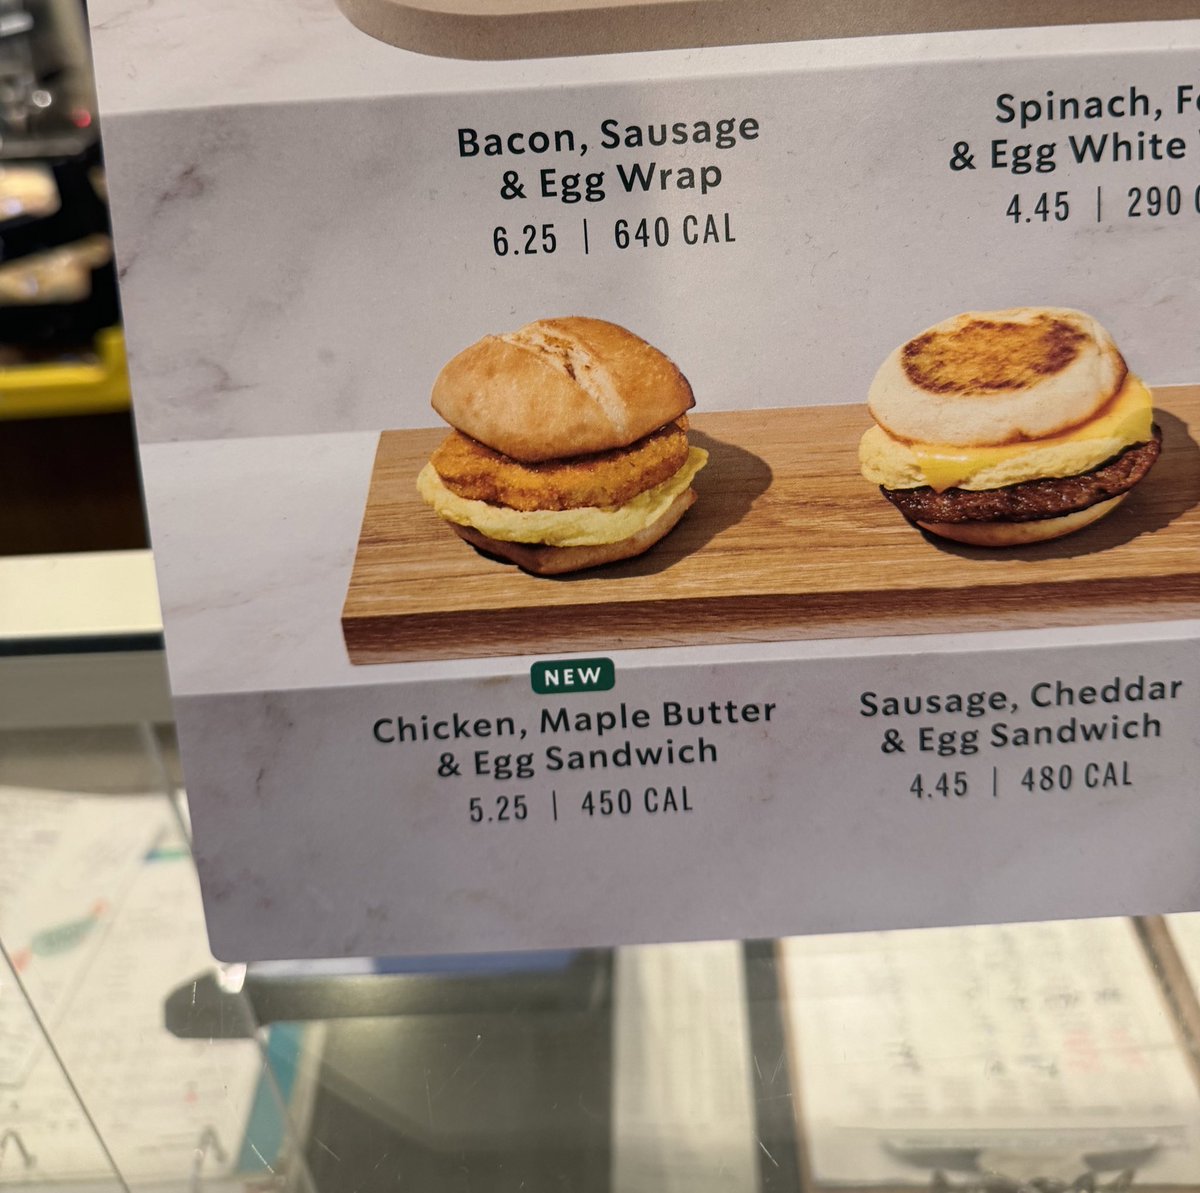 I didn’t think Starbucks could make a better sandwich than the sausage cheddar and egg but let me tell you the new chicken one with maple butter and egg absolutely slaps. Strong recommend